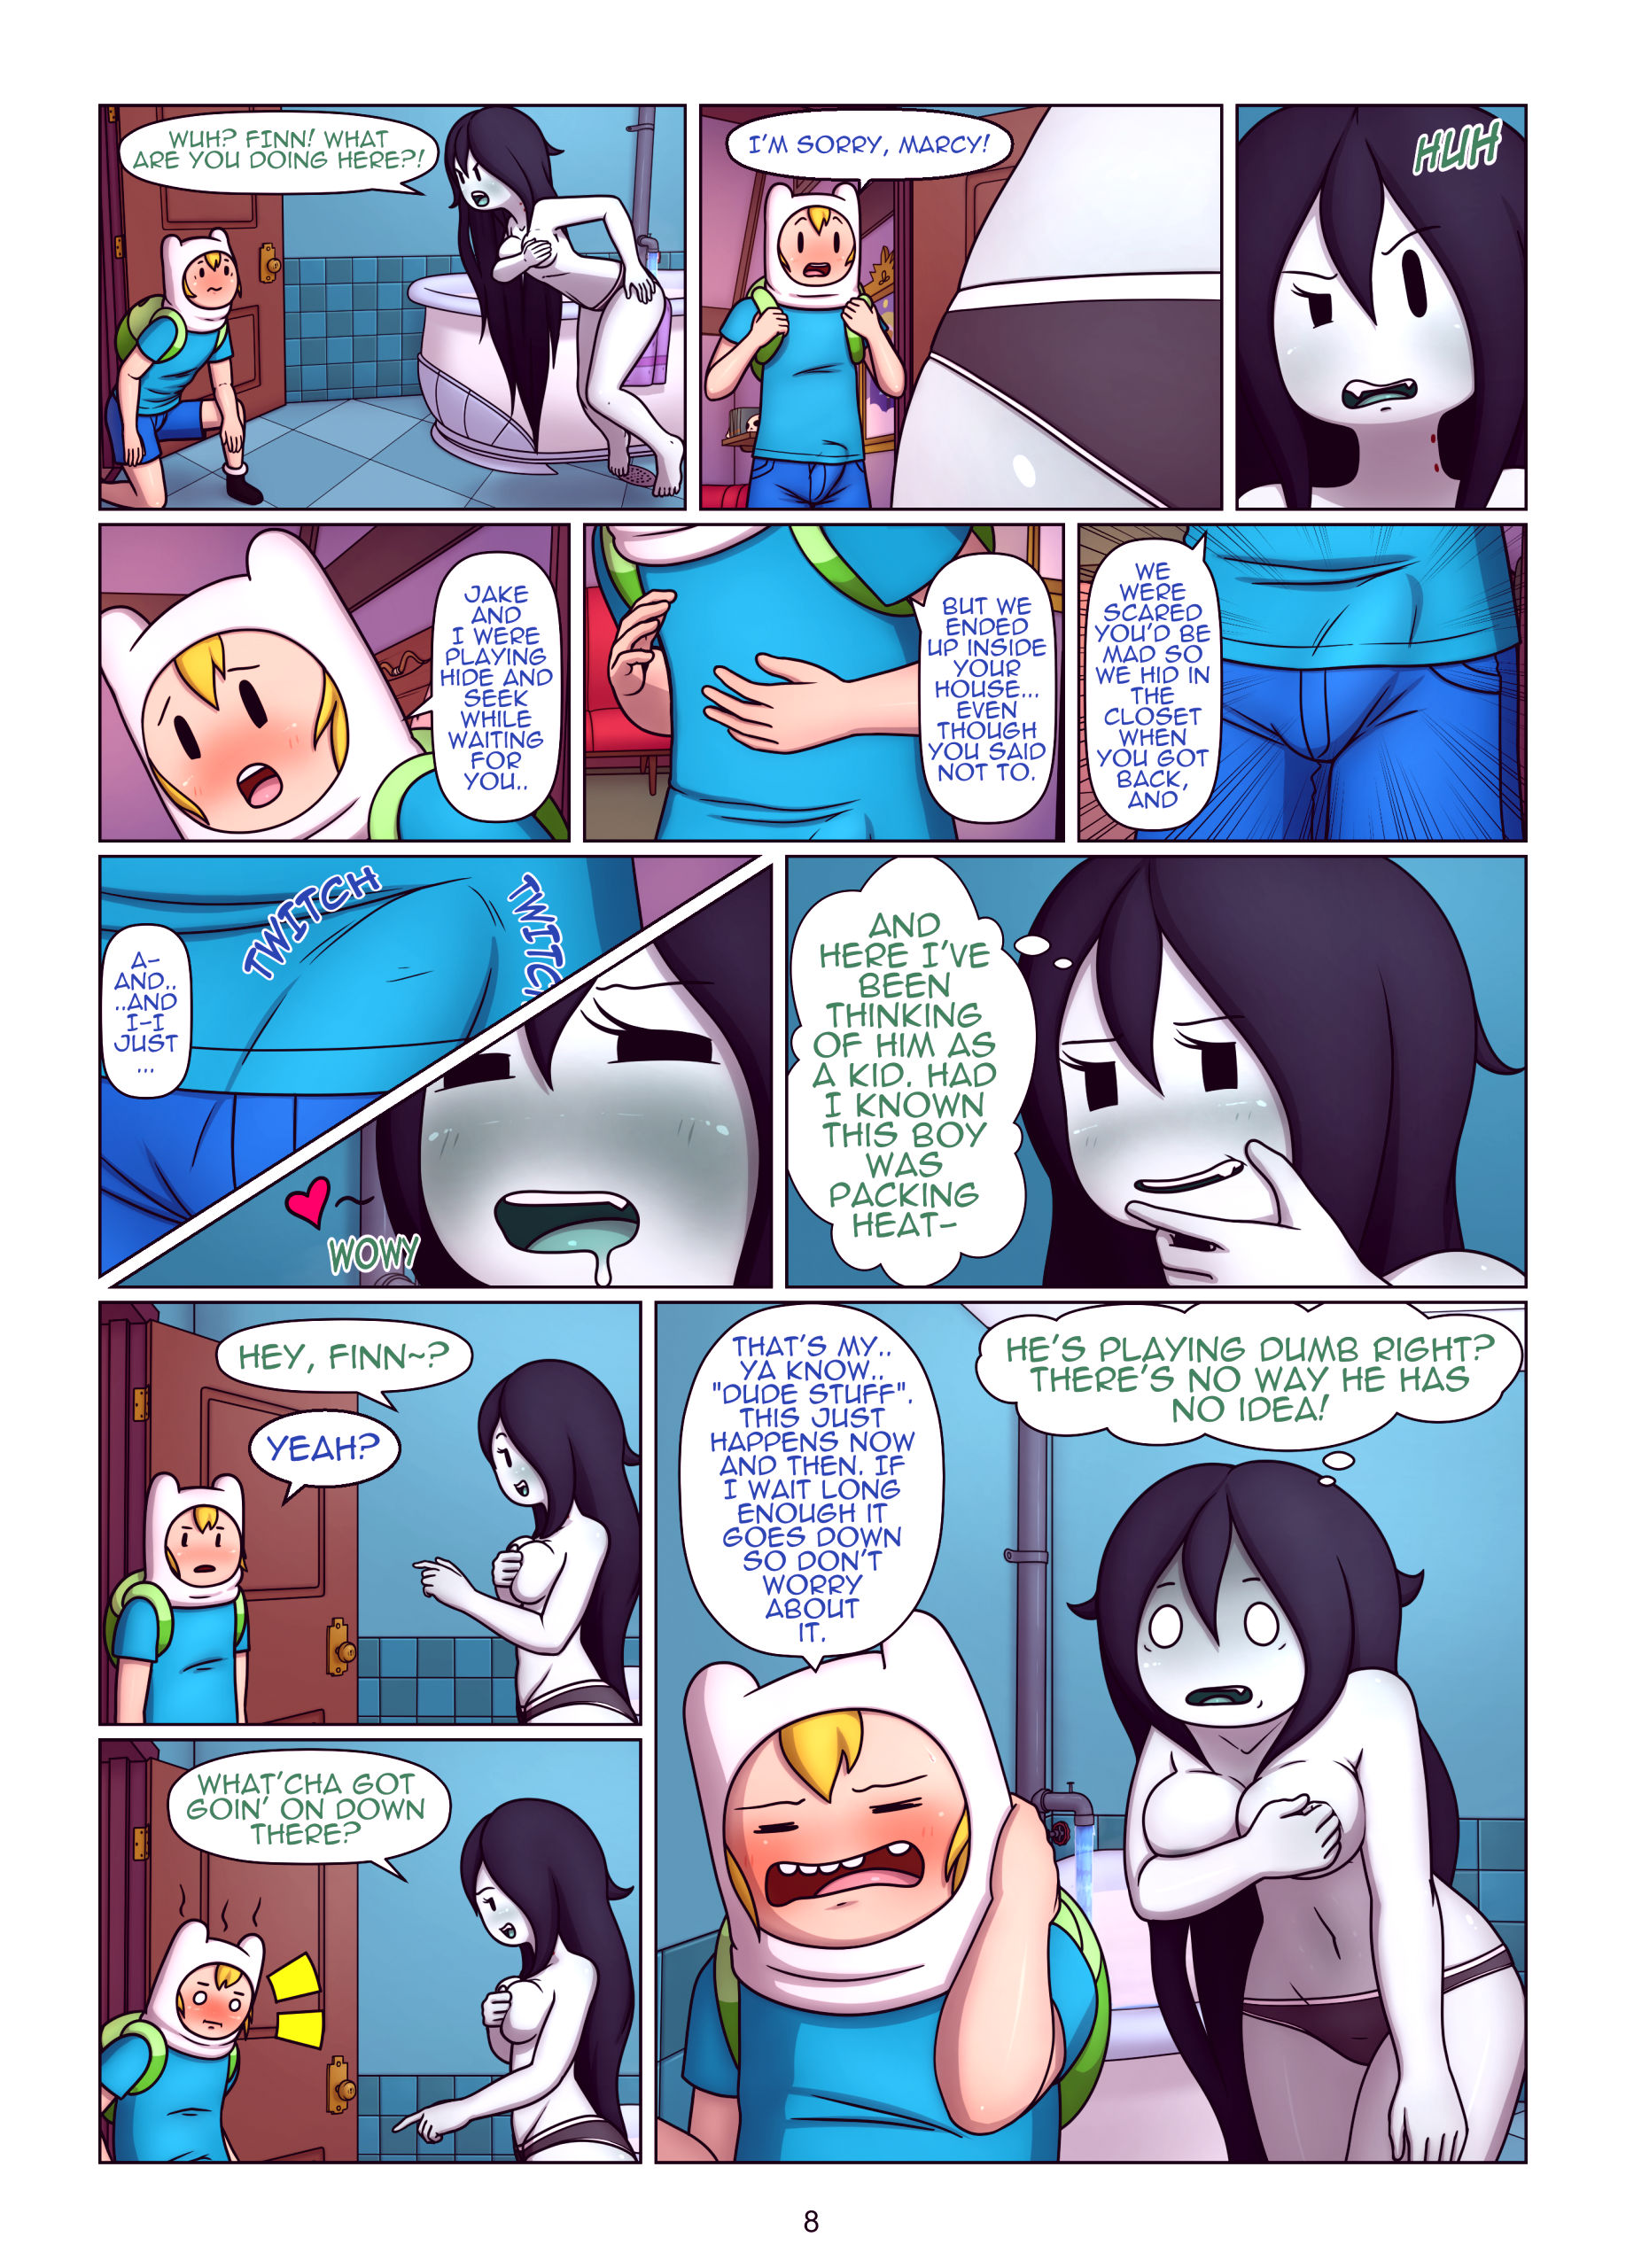 Misadventure time the collection porn comic picture 9.